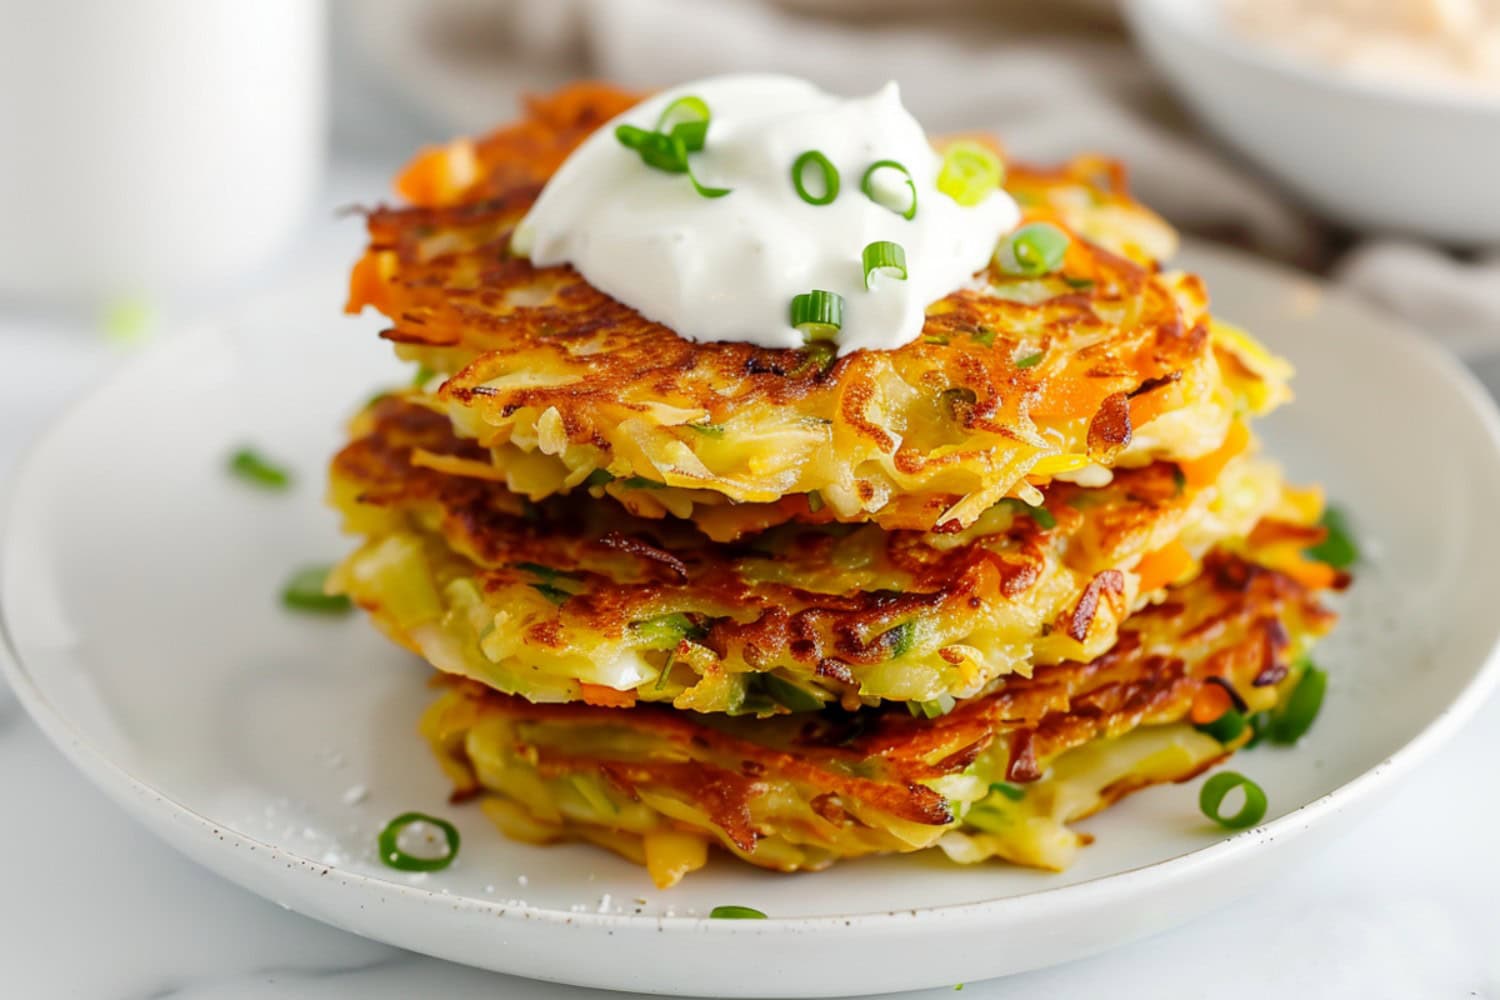 Crispy cabbage fritters, golden brown and delicious, perfect for a savory snack or side dish